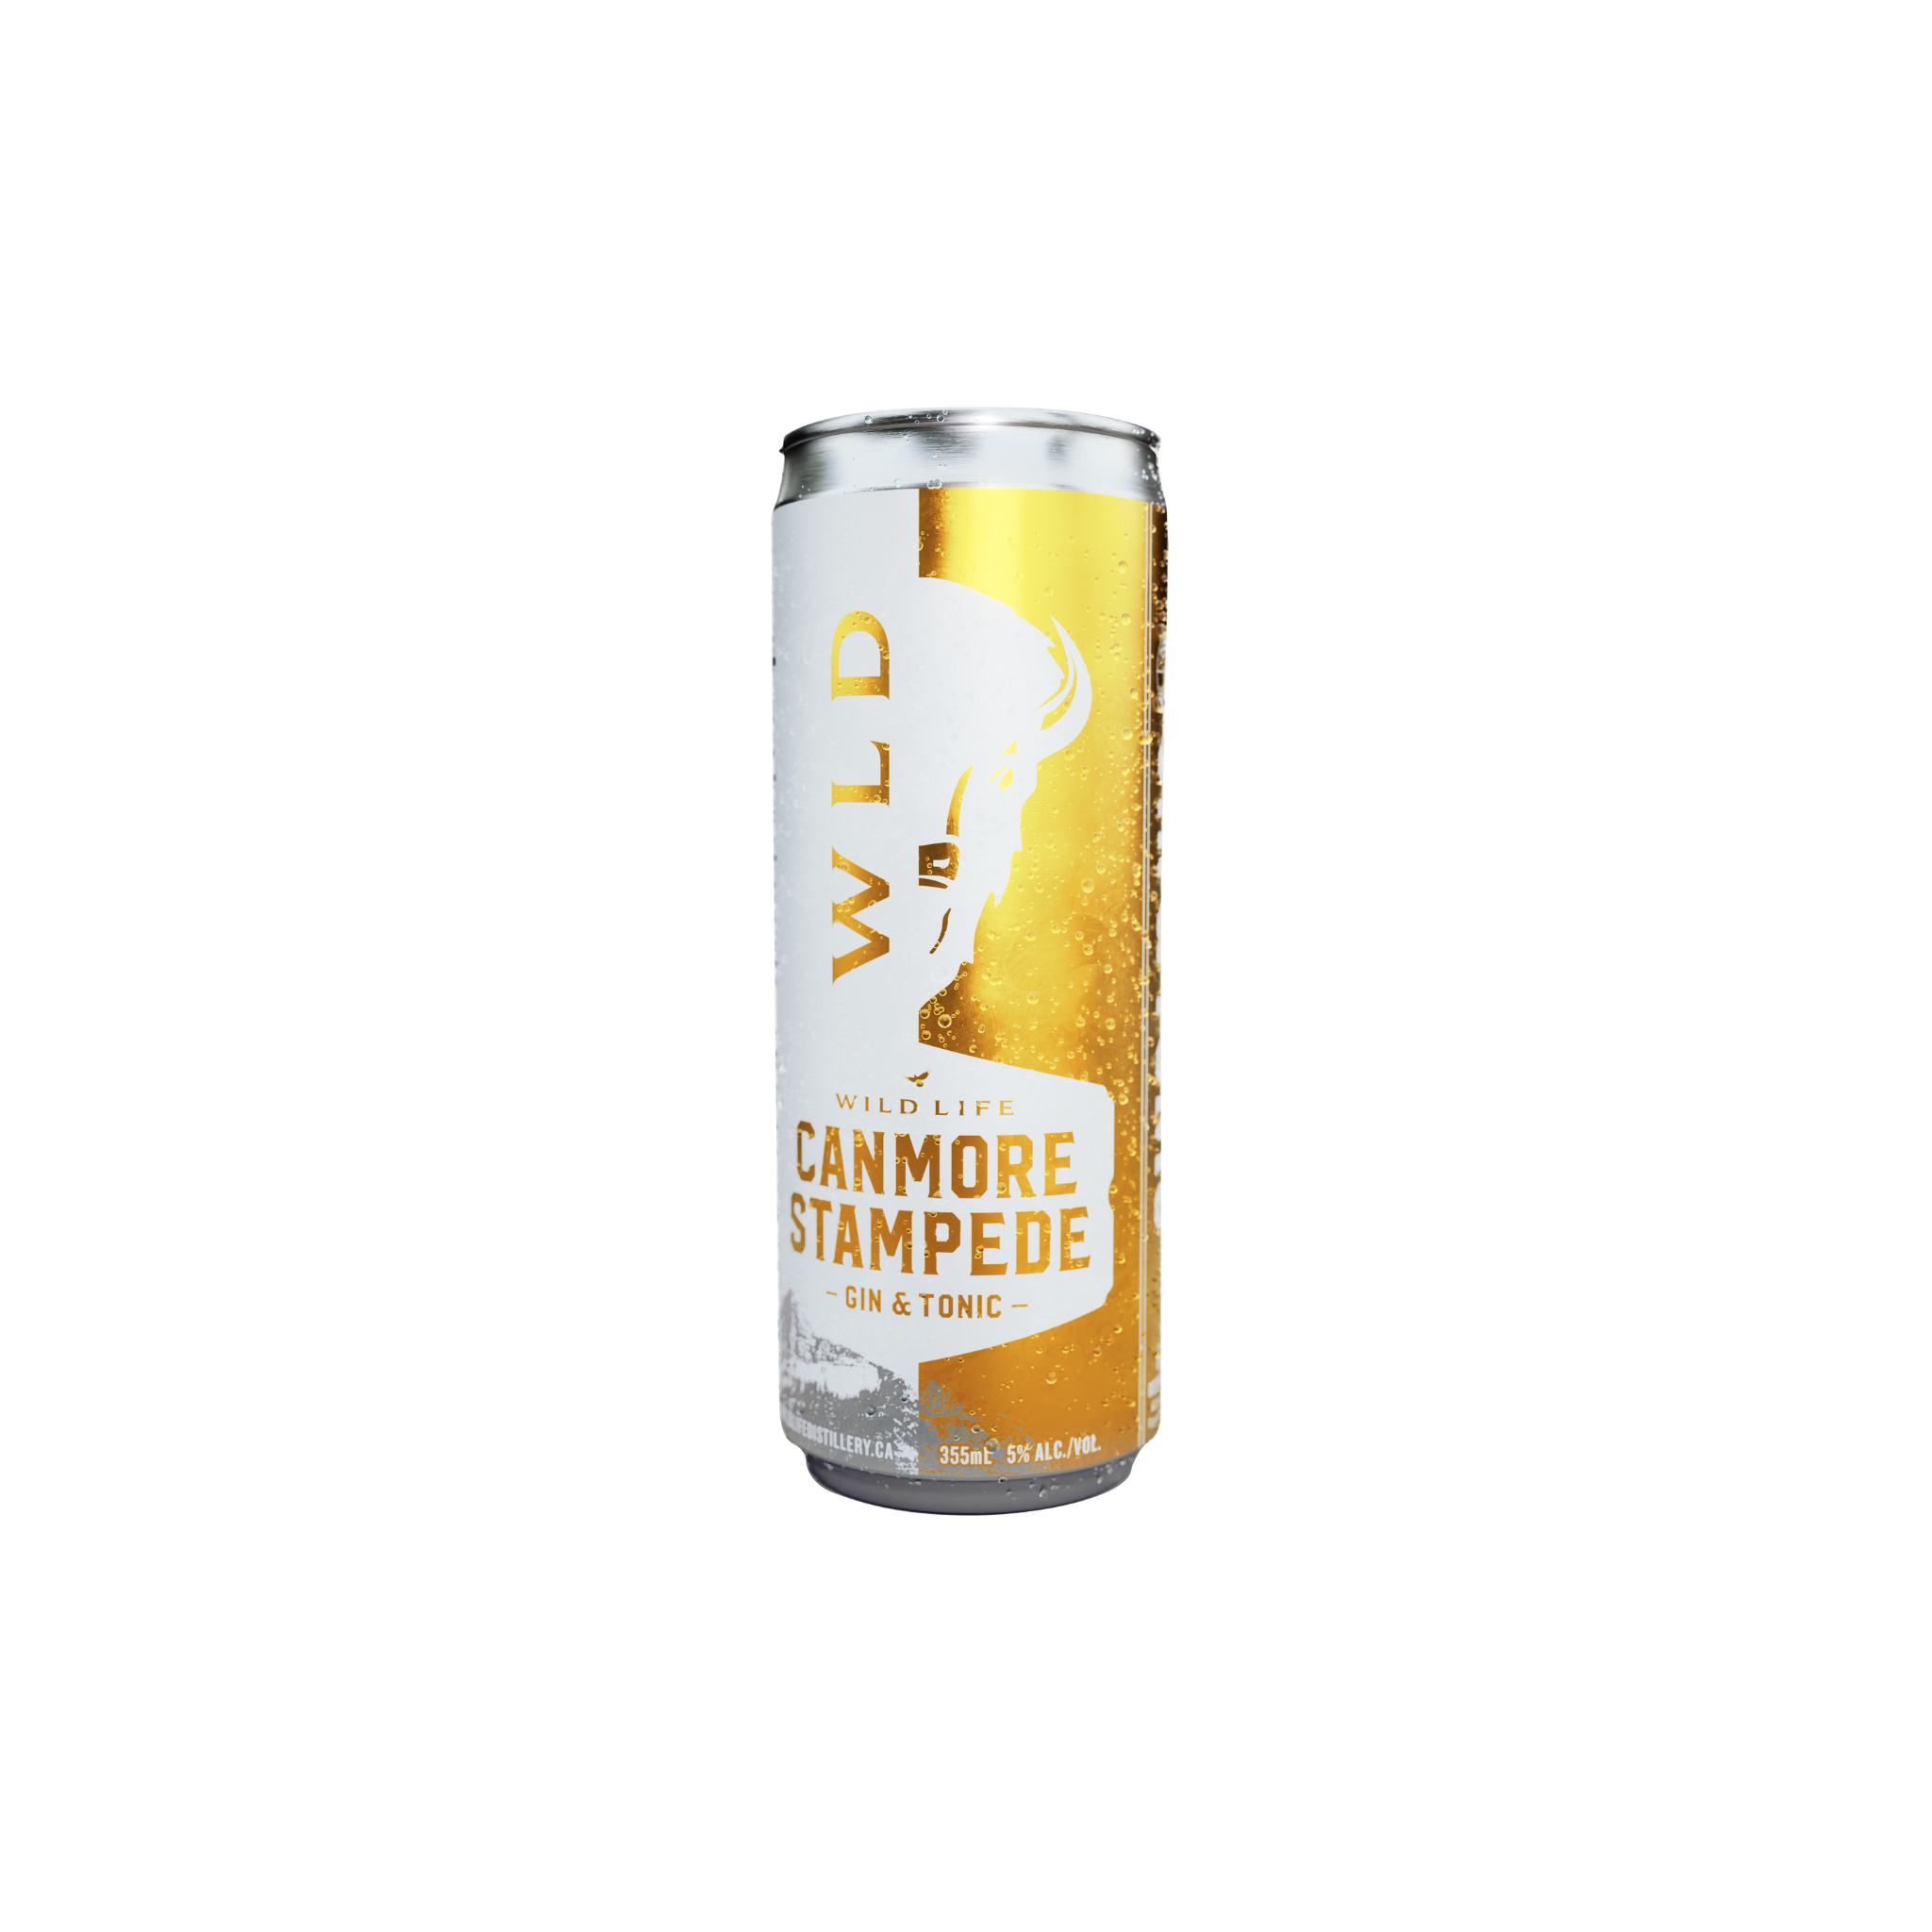 Canmore Stampede Gin & Tonic - 4 x 355mL Cans